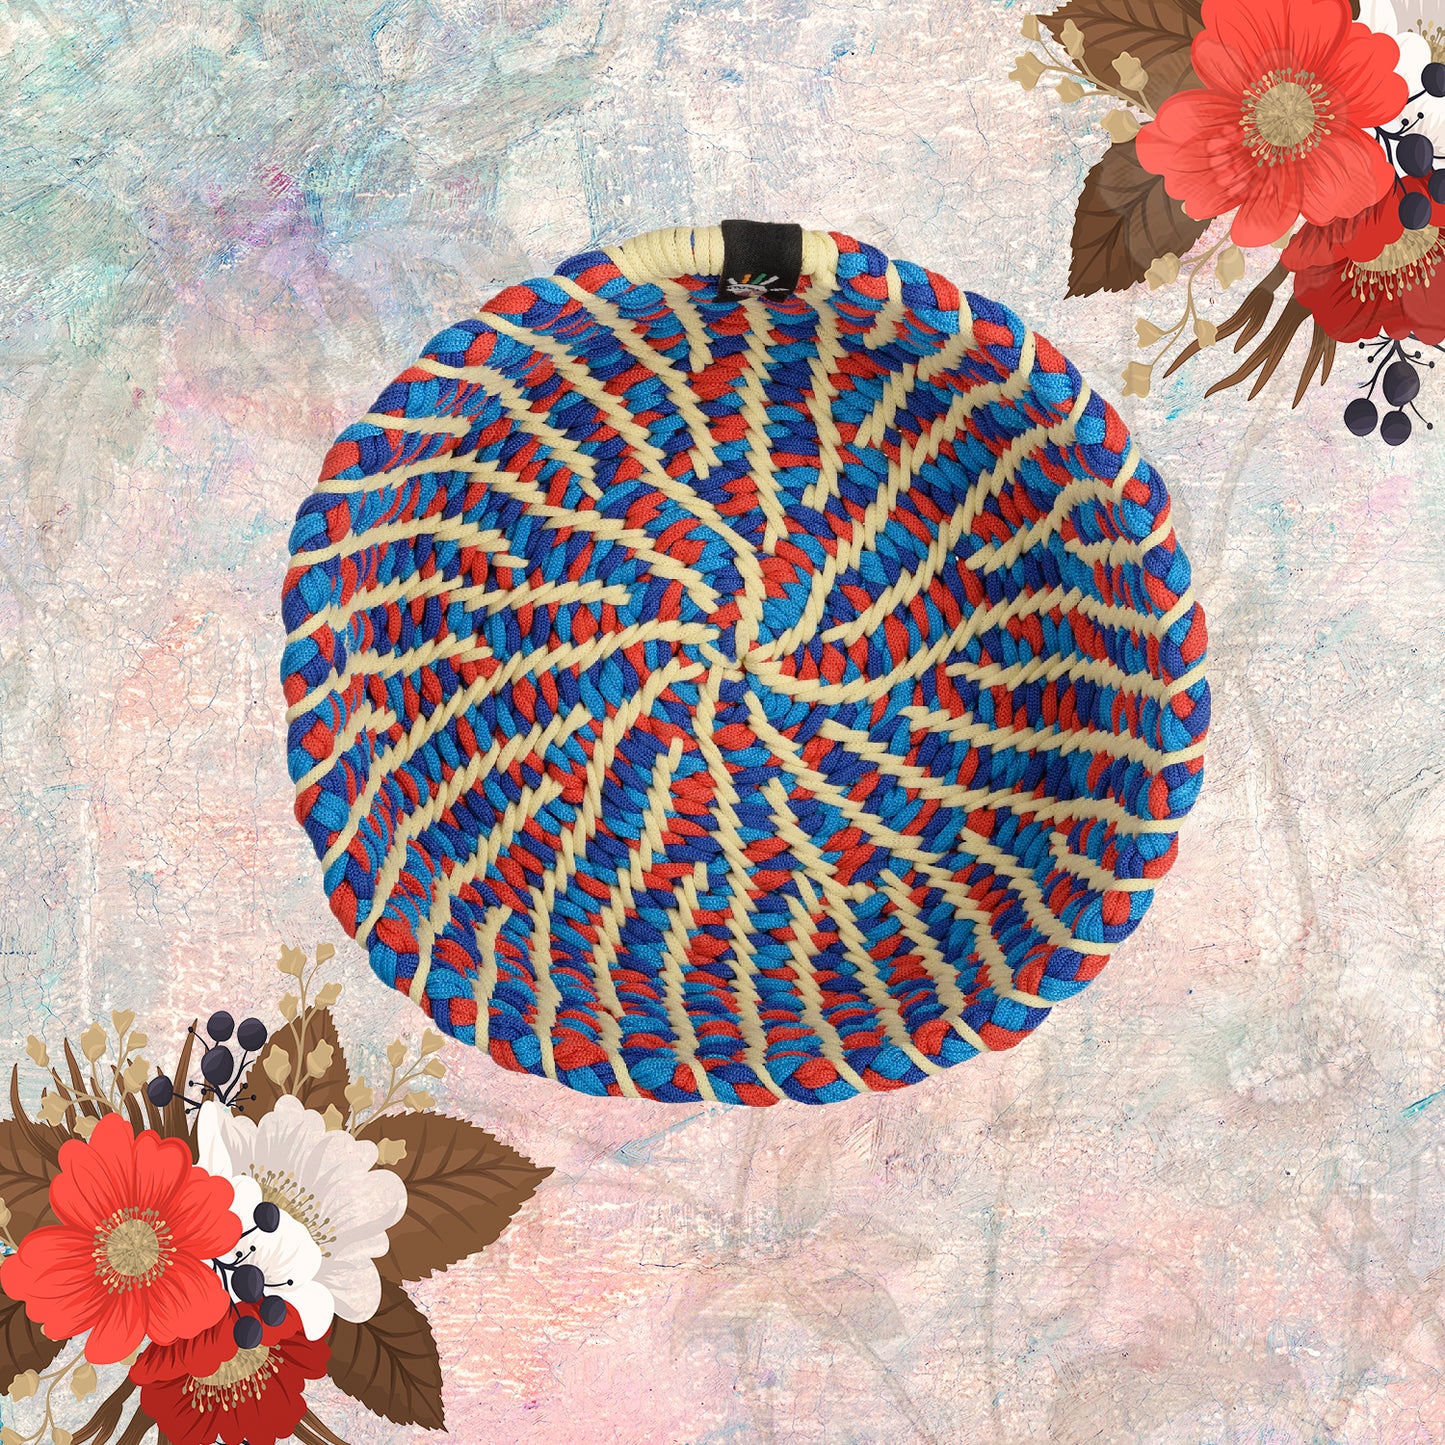 Happy Cultures 'Aster' Vibrant Red and Blue Braided Basket